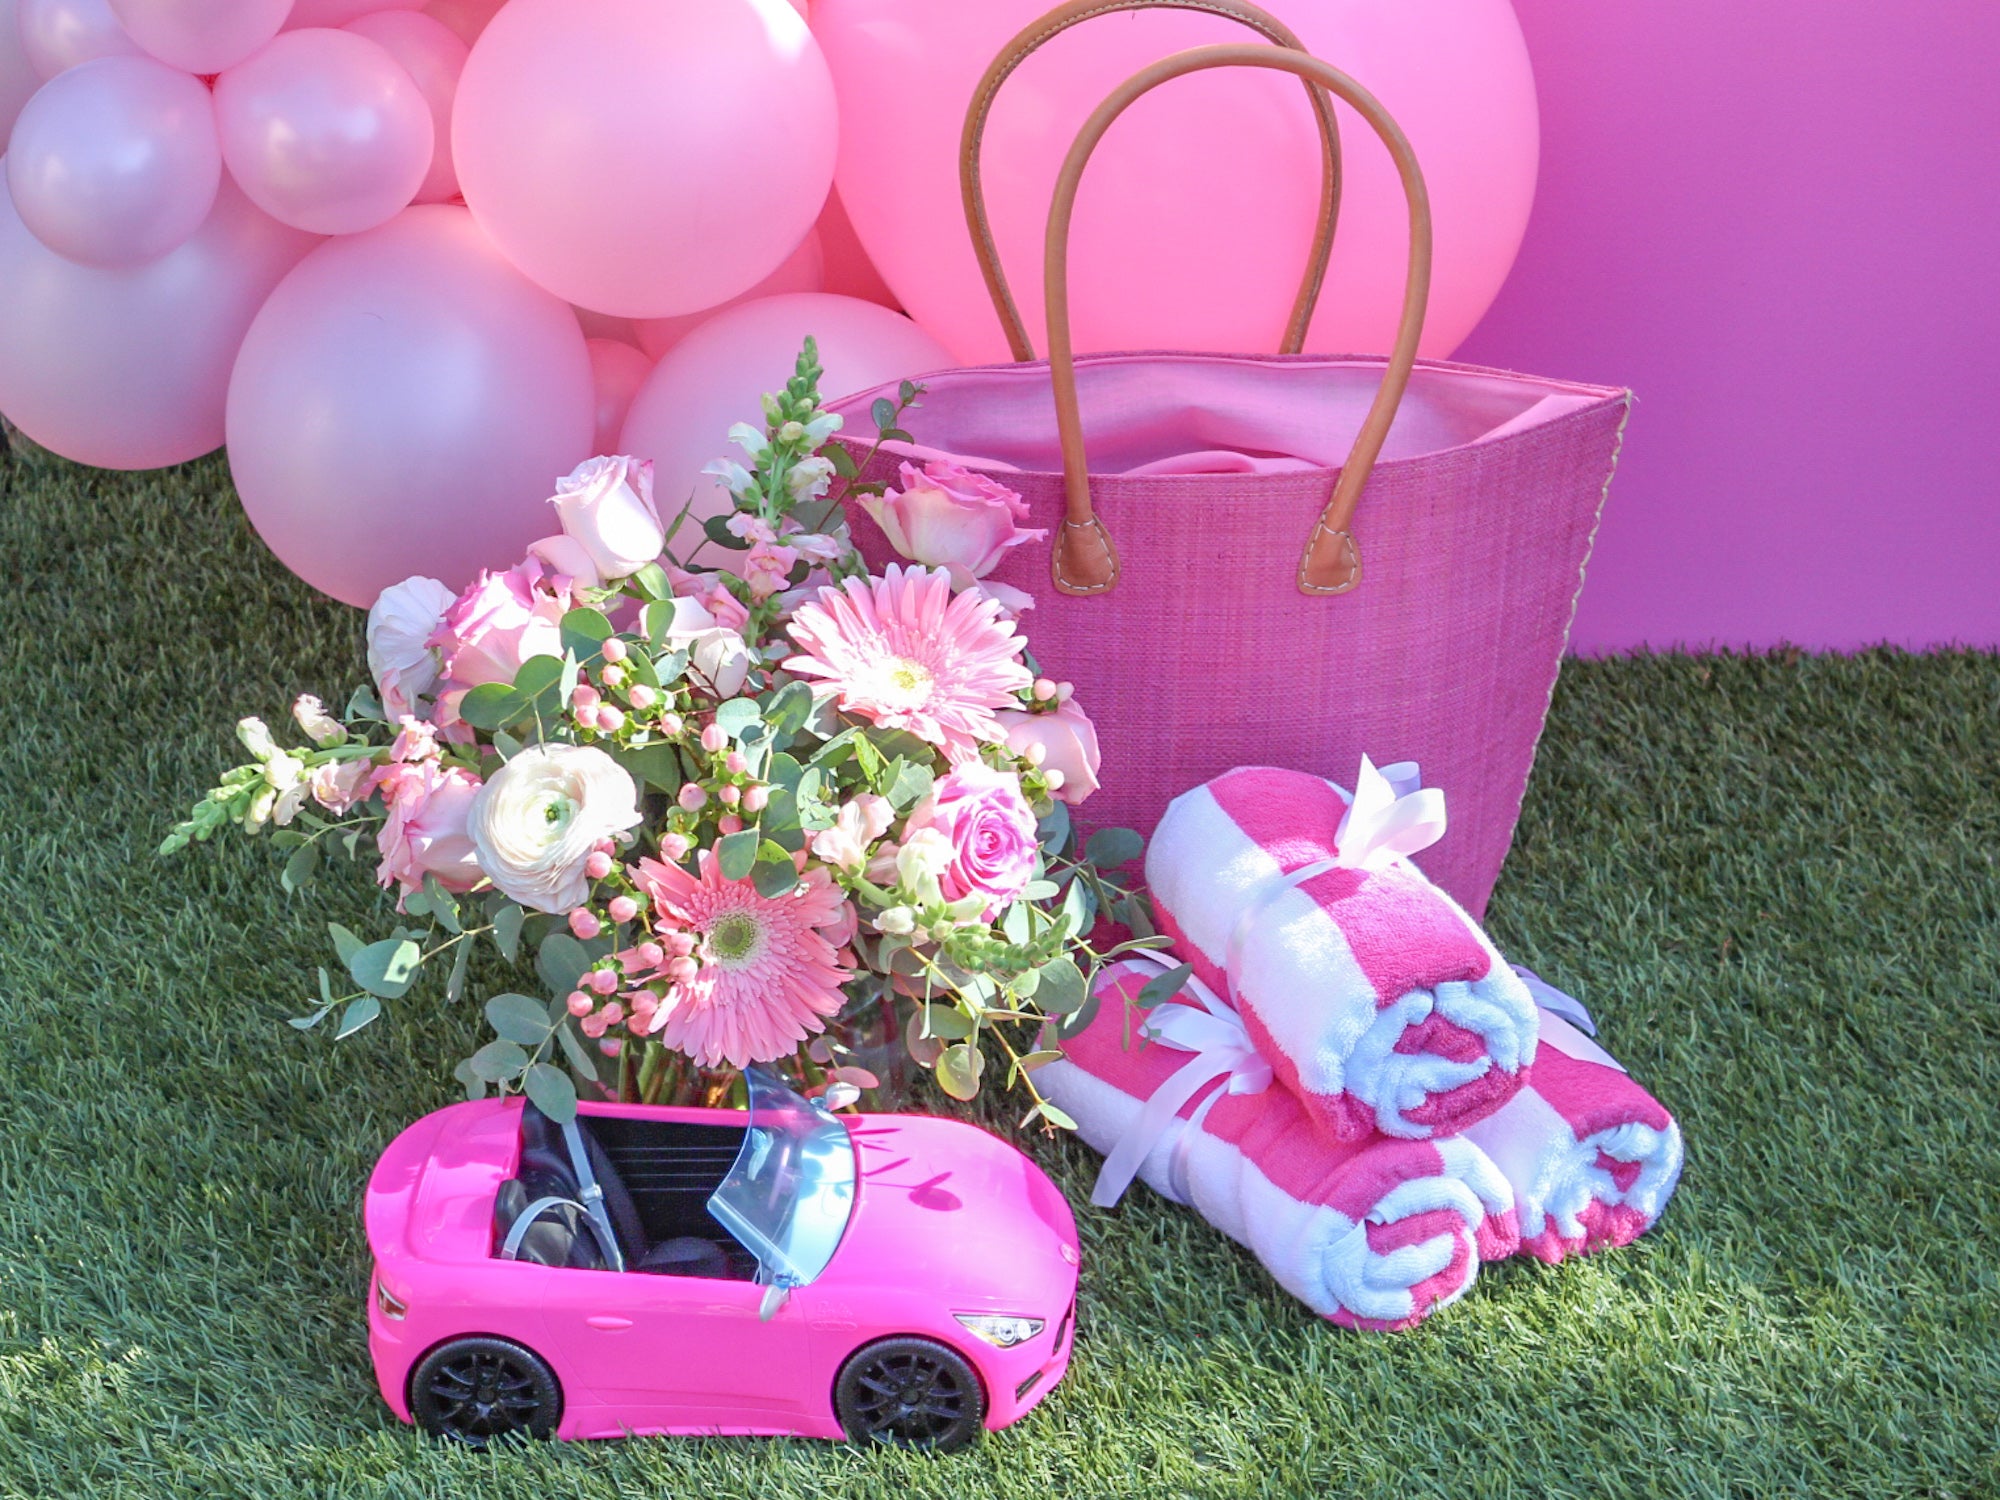 Barbie Car and Decor | The Party Darling